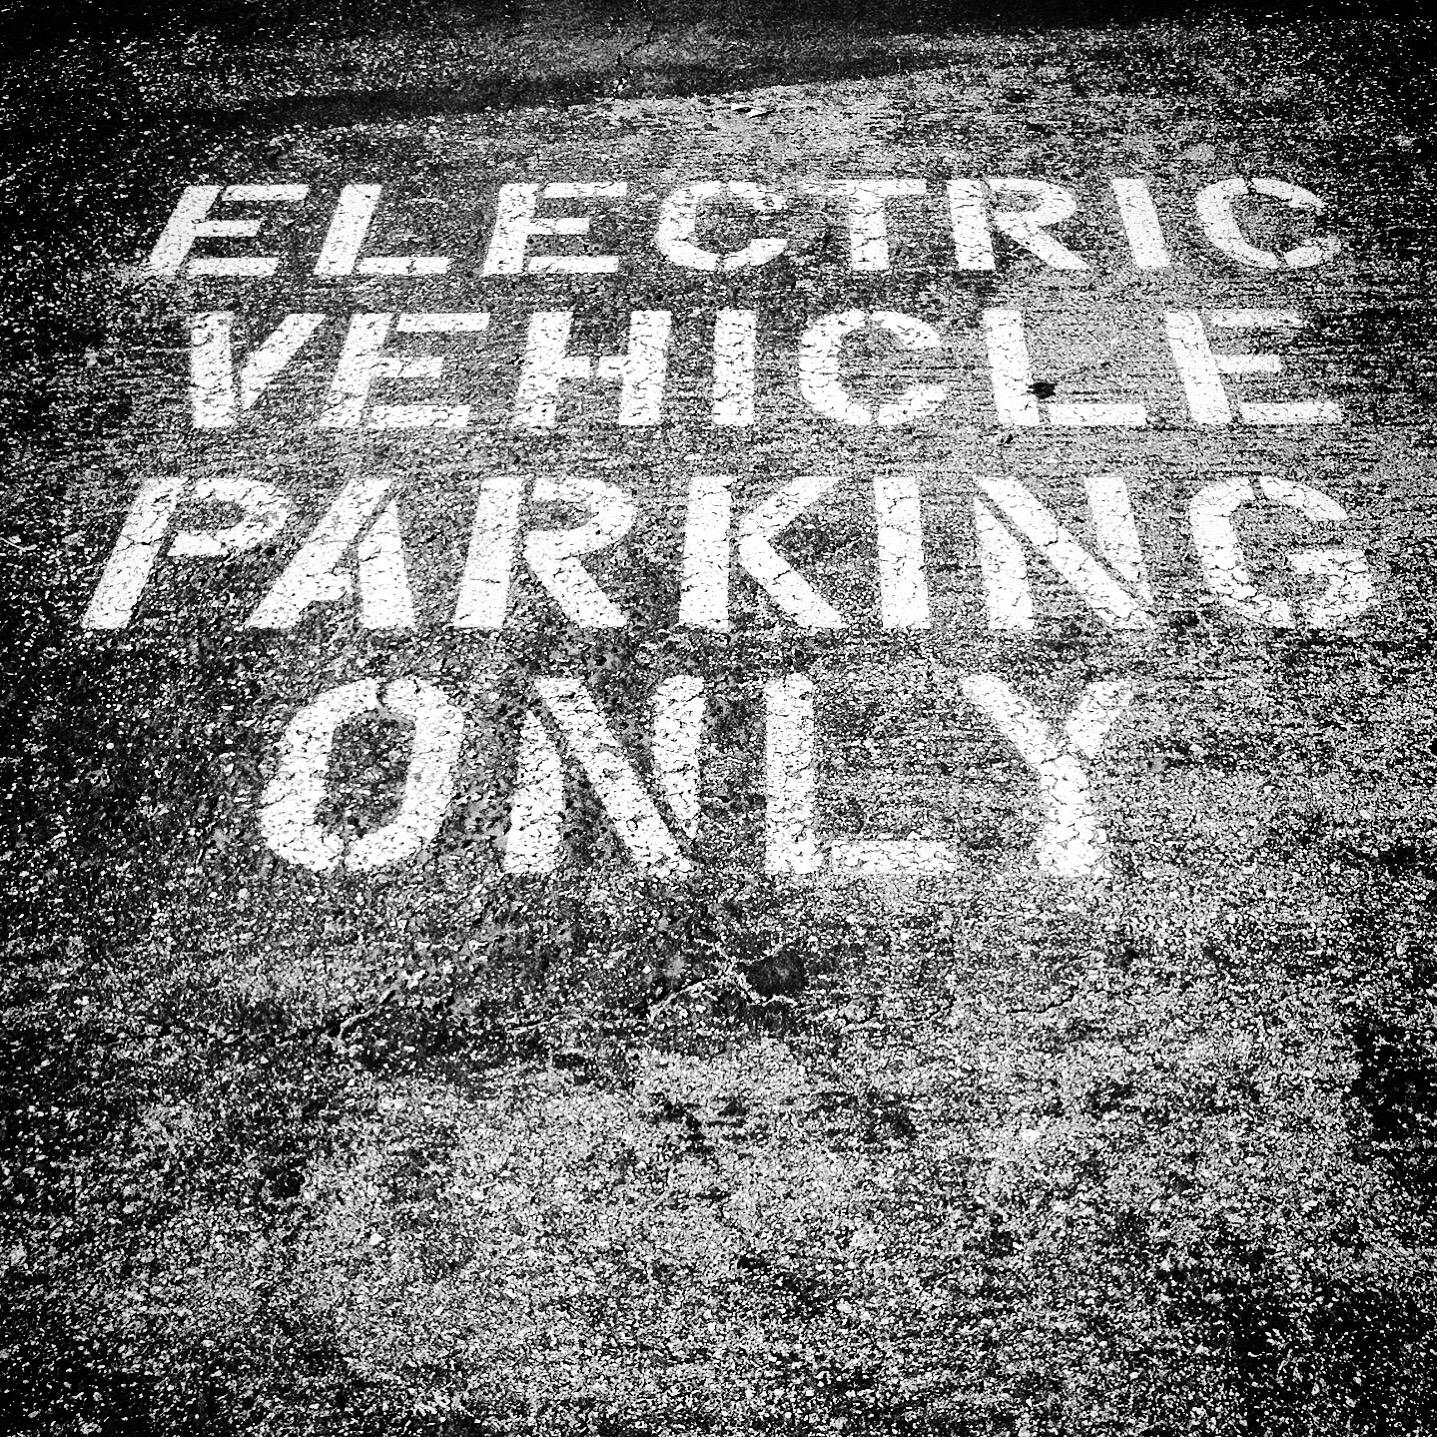 If you’re thinking about investing in an EV company you might want to hold off for a little.